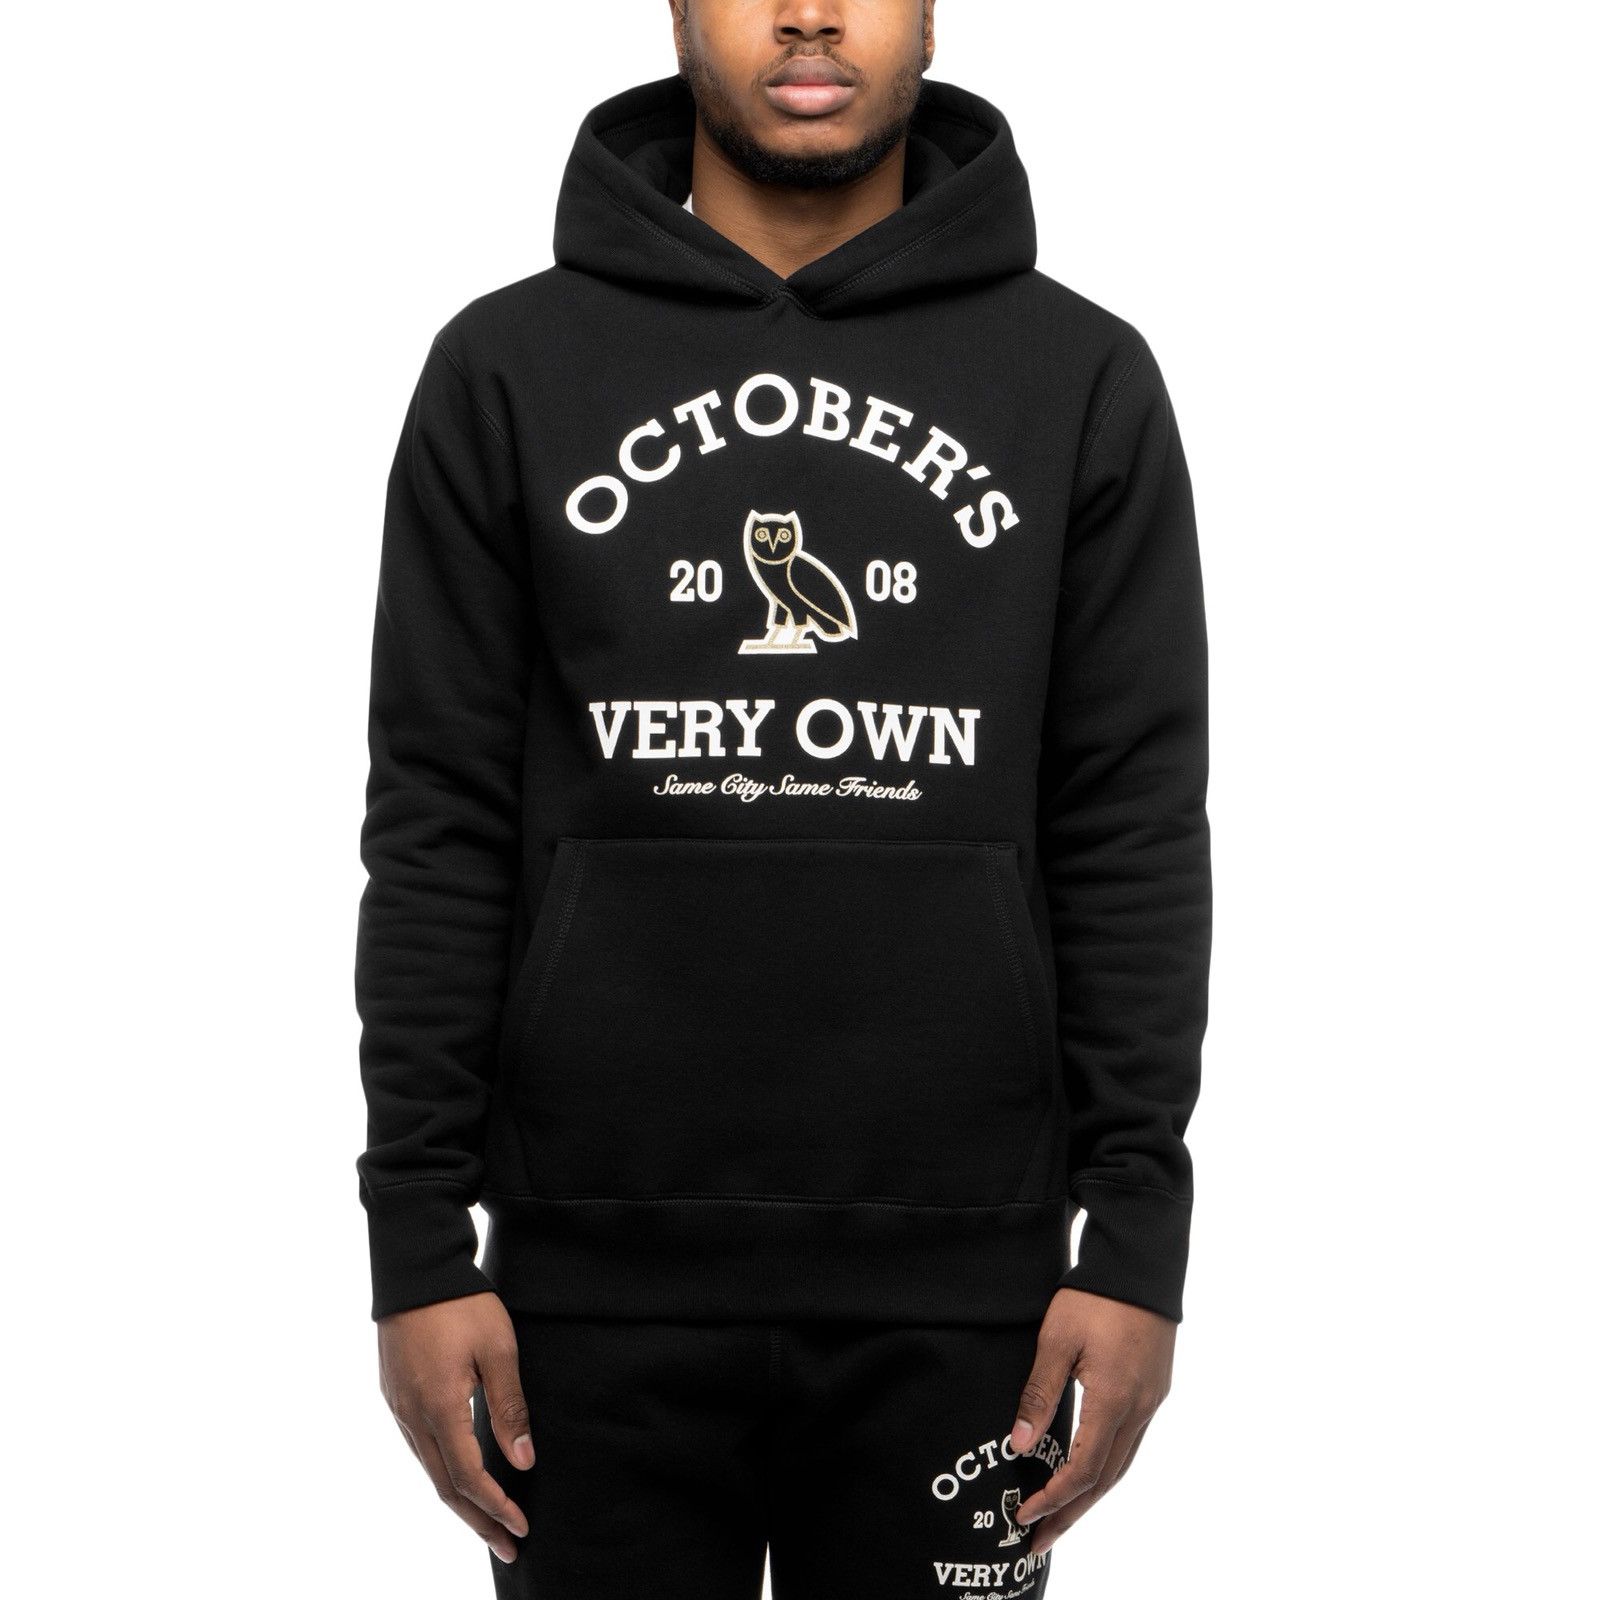 Octobers Very Own Ovo Collegiate Hoodie Size US L / EU 52-54 / 3 - 1 Preview